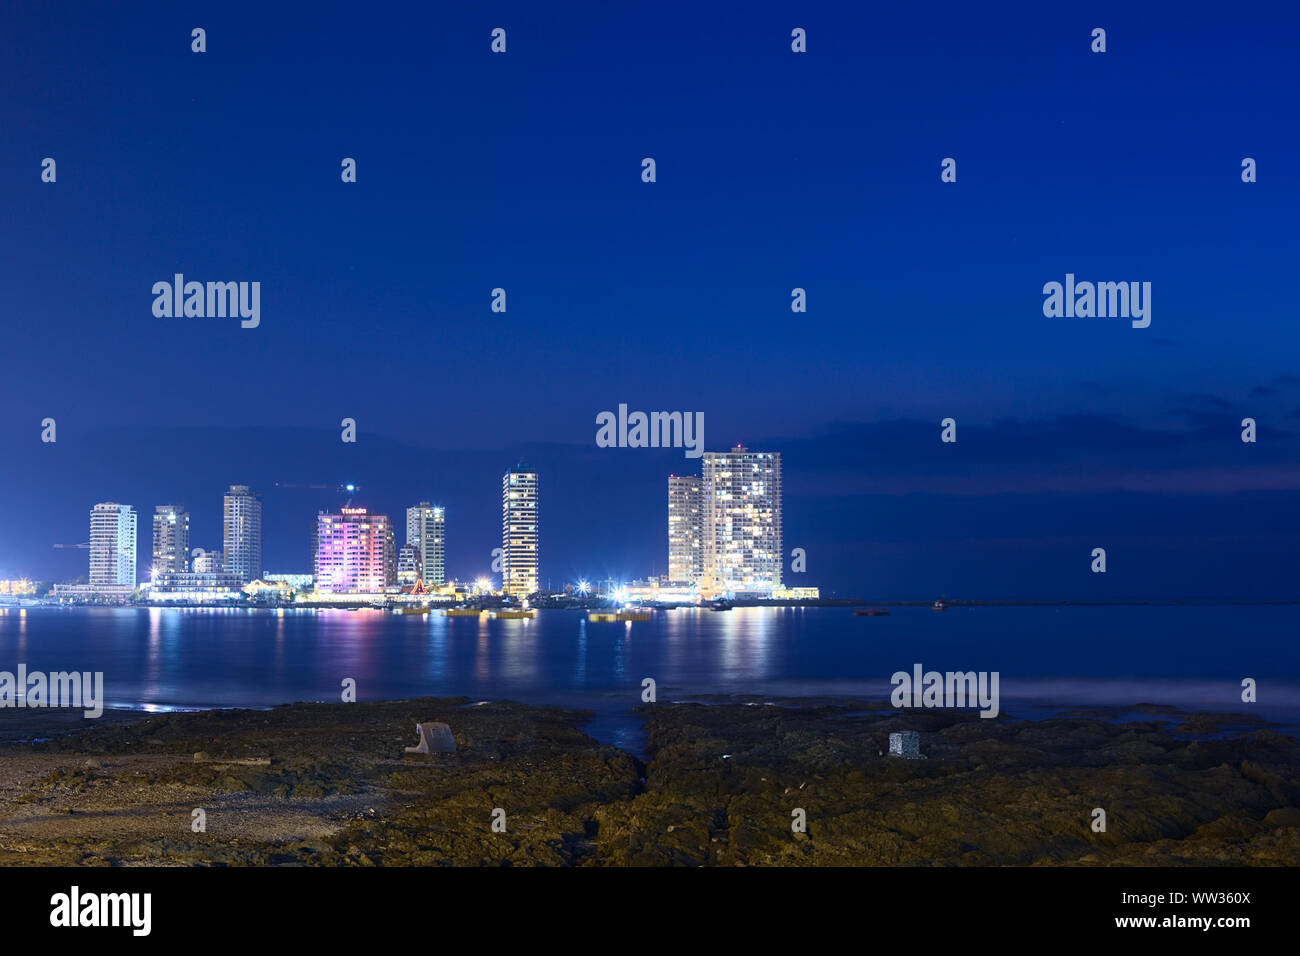 IQUIQUE, CHILE - JANUARY 22, 2015: The peninsula at the end of Cavancha beach with hotels  and modern apartment buildings photographed in the evening Stock Photo